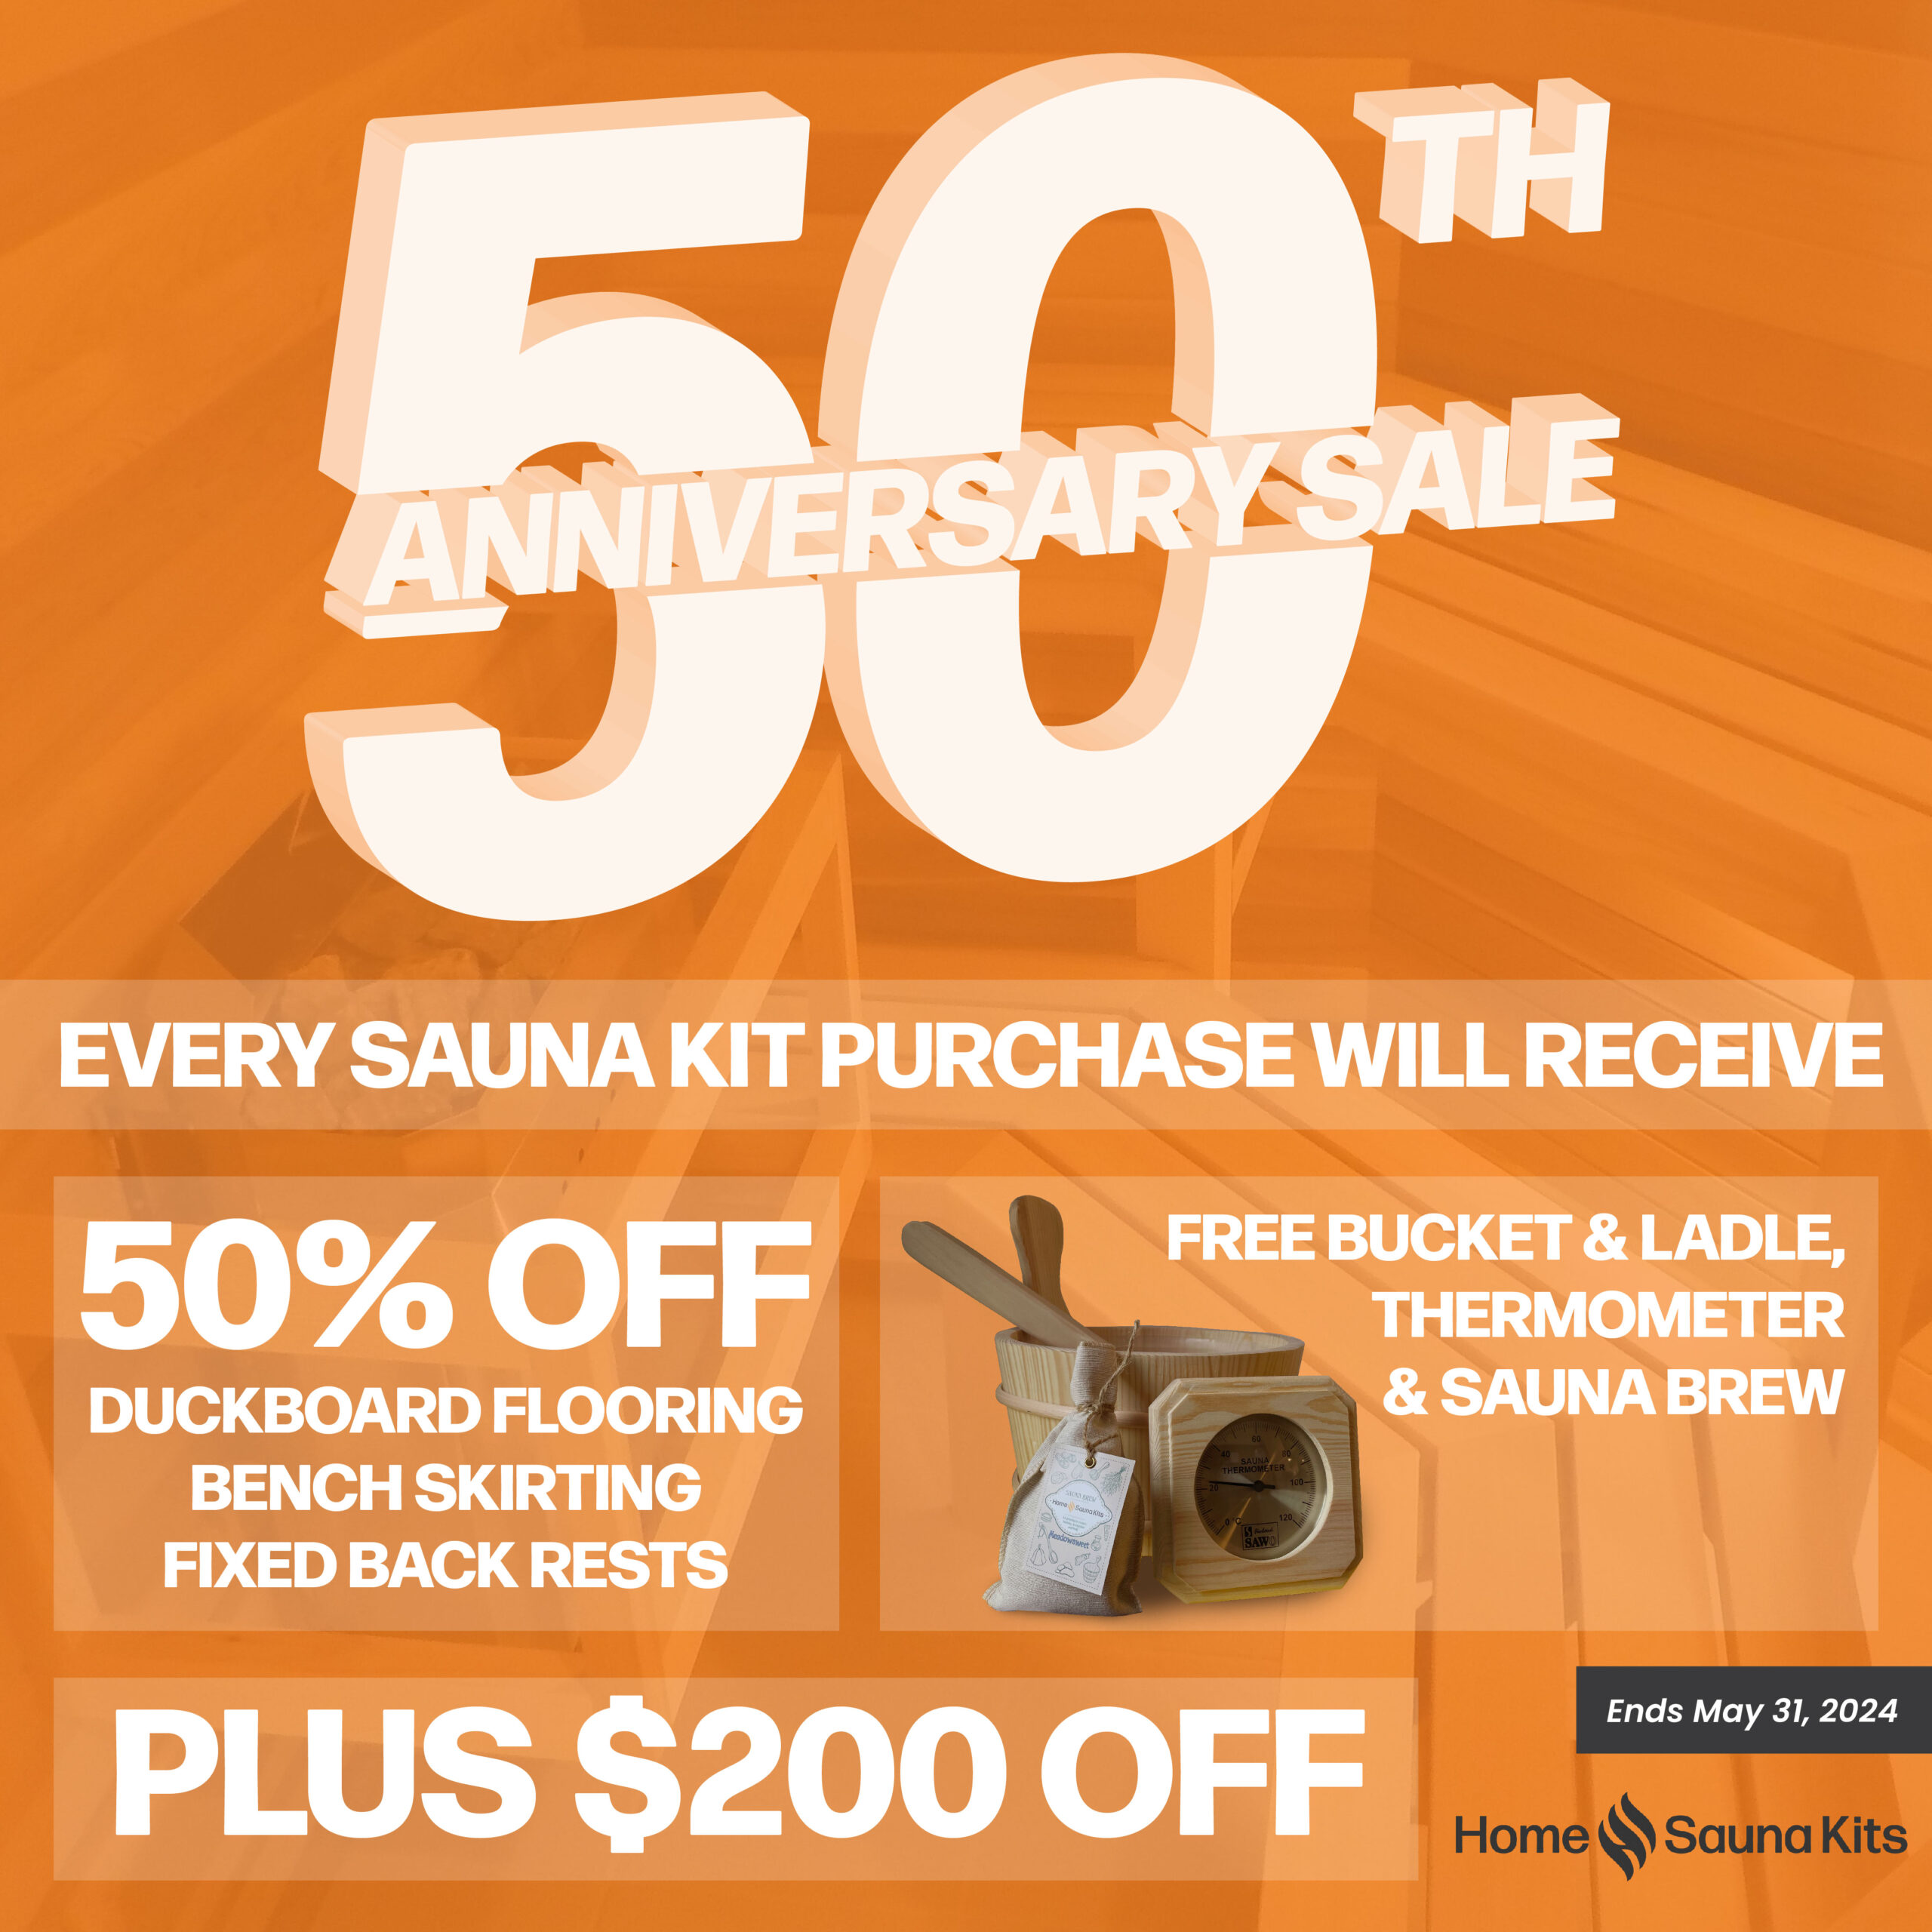 50th anniversary sale. Every sauna kit purchase will receive 50% off duckboard flooring, bench skirting and fixed backrests. Free bucket, ladle and sauna brew with image of free products. Plus $200 off. Ends may 31, 2024.